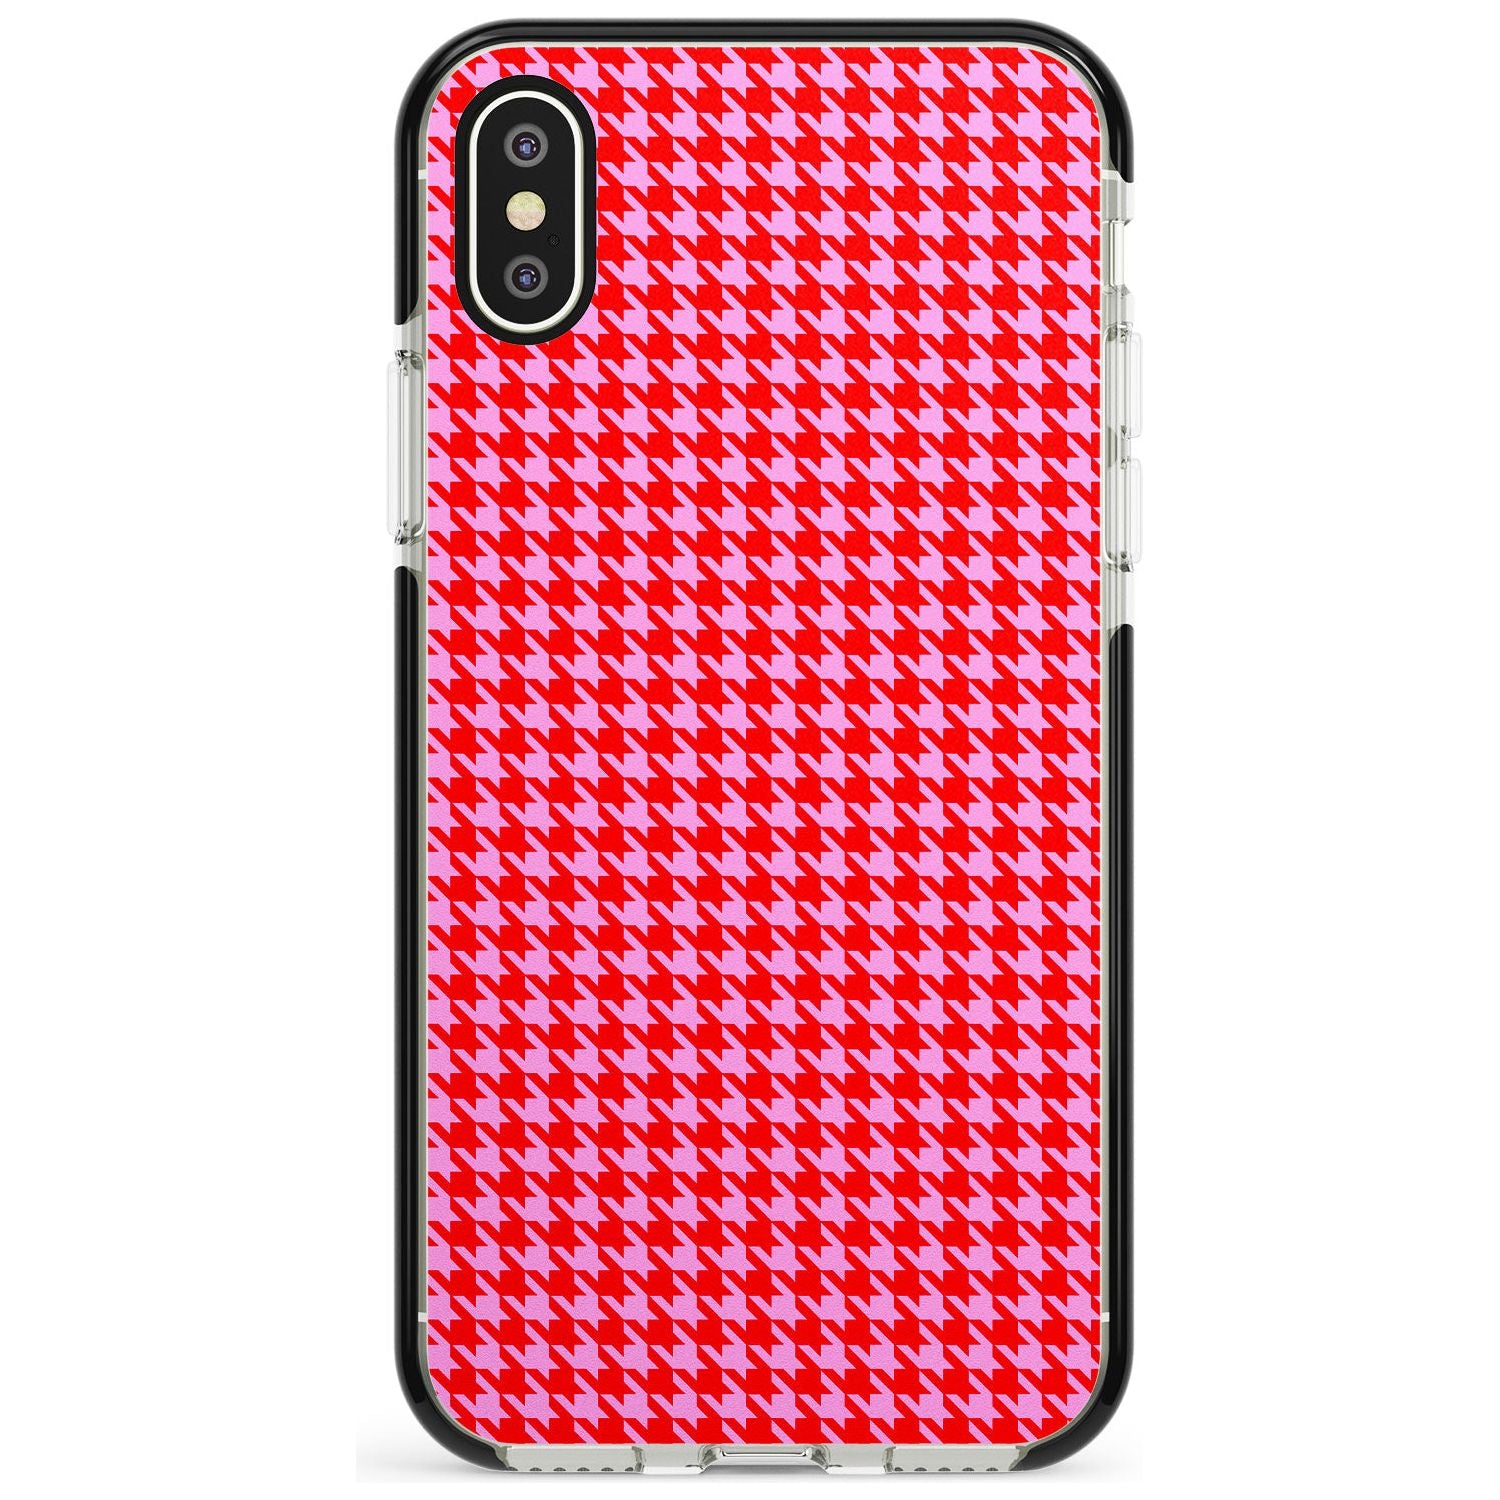 Neon Pink & Red Houndstooth Pattern Black Impact Phone Case for iPhone X XS Max XR